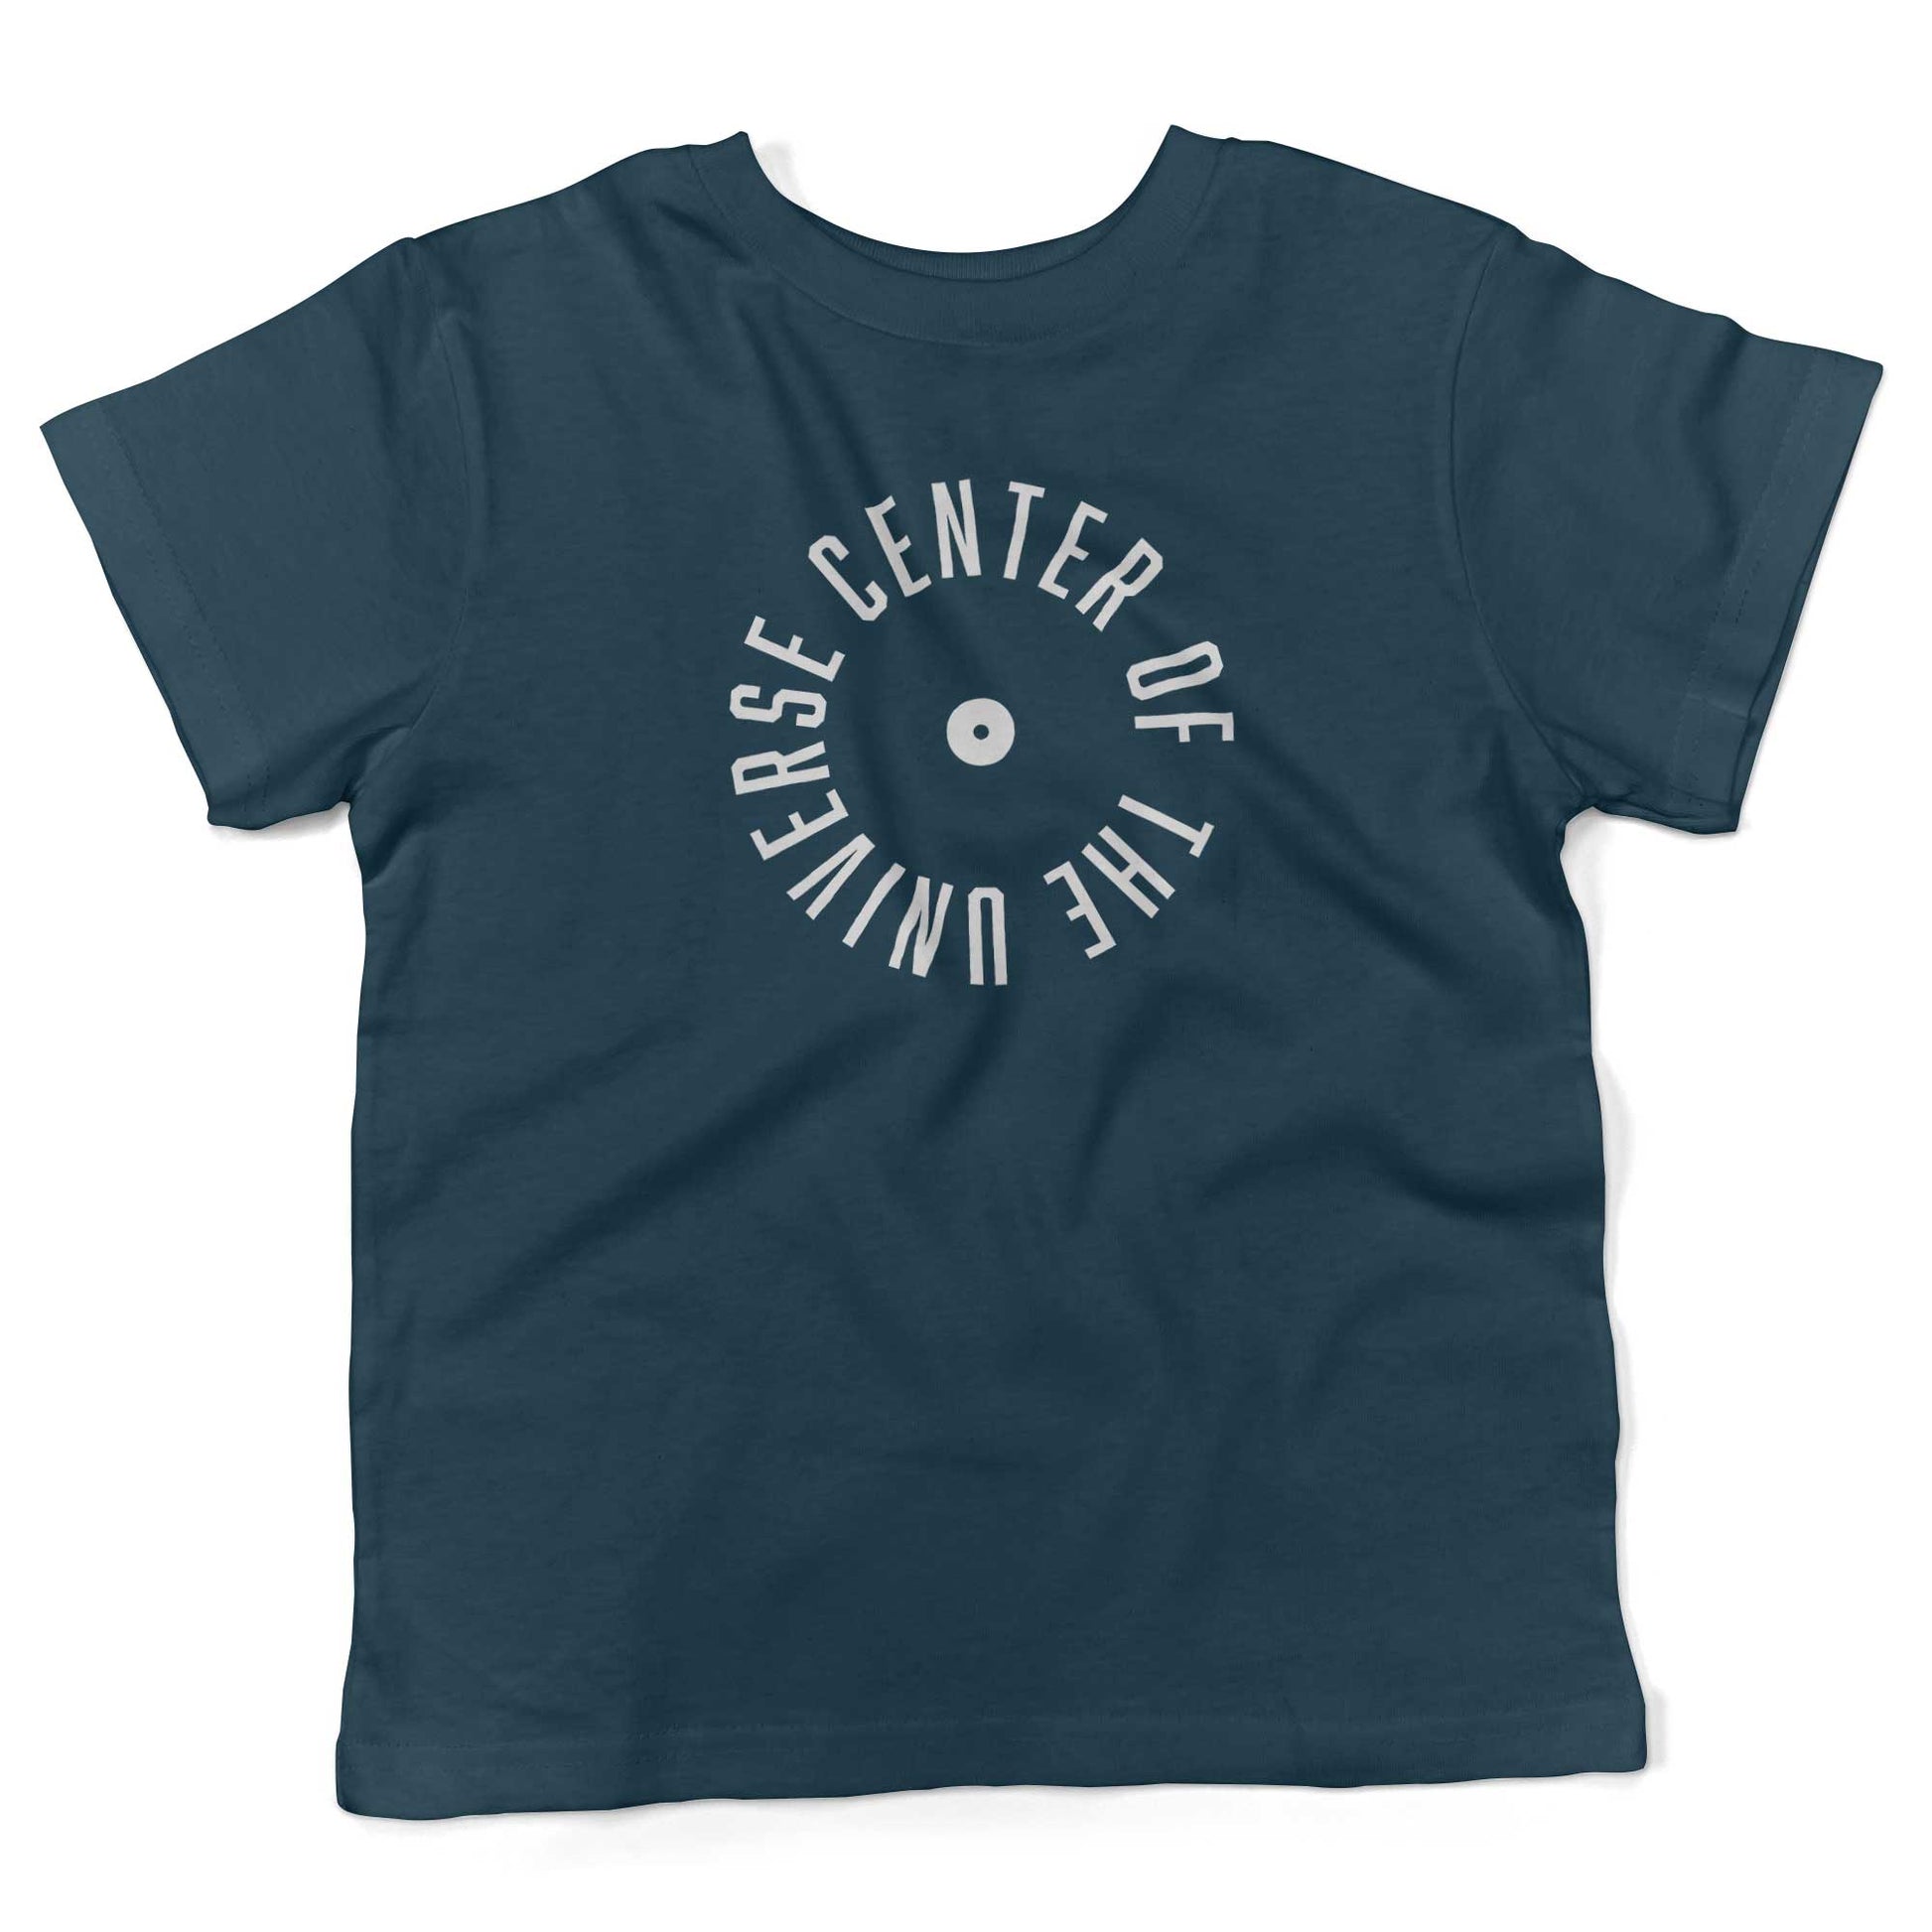 Center Of The Universe Toddler Shirt-Organic Pacific Blue-2T